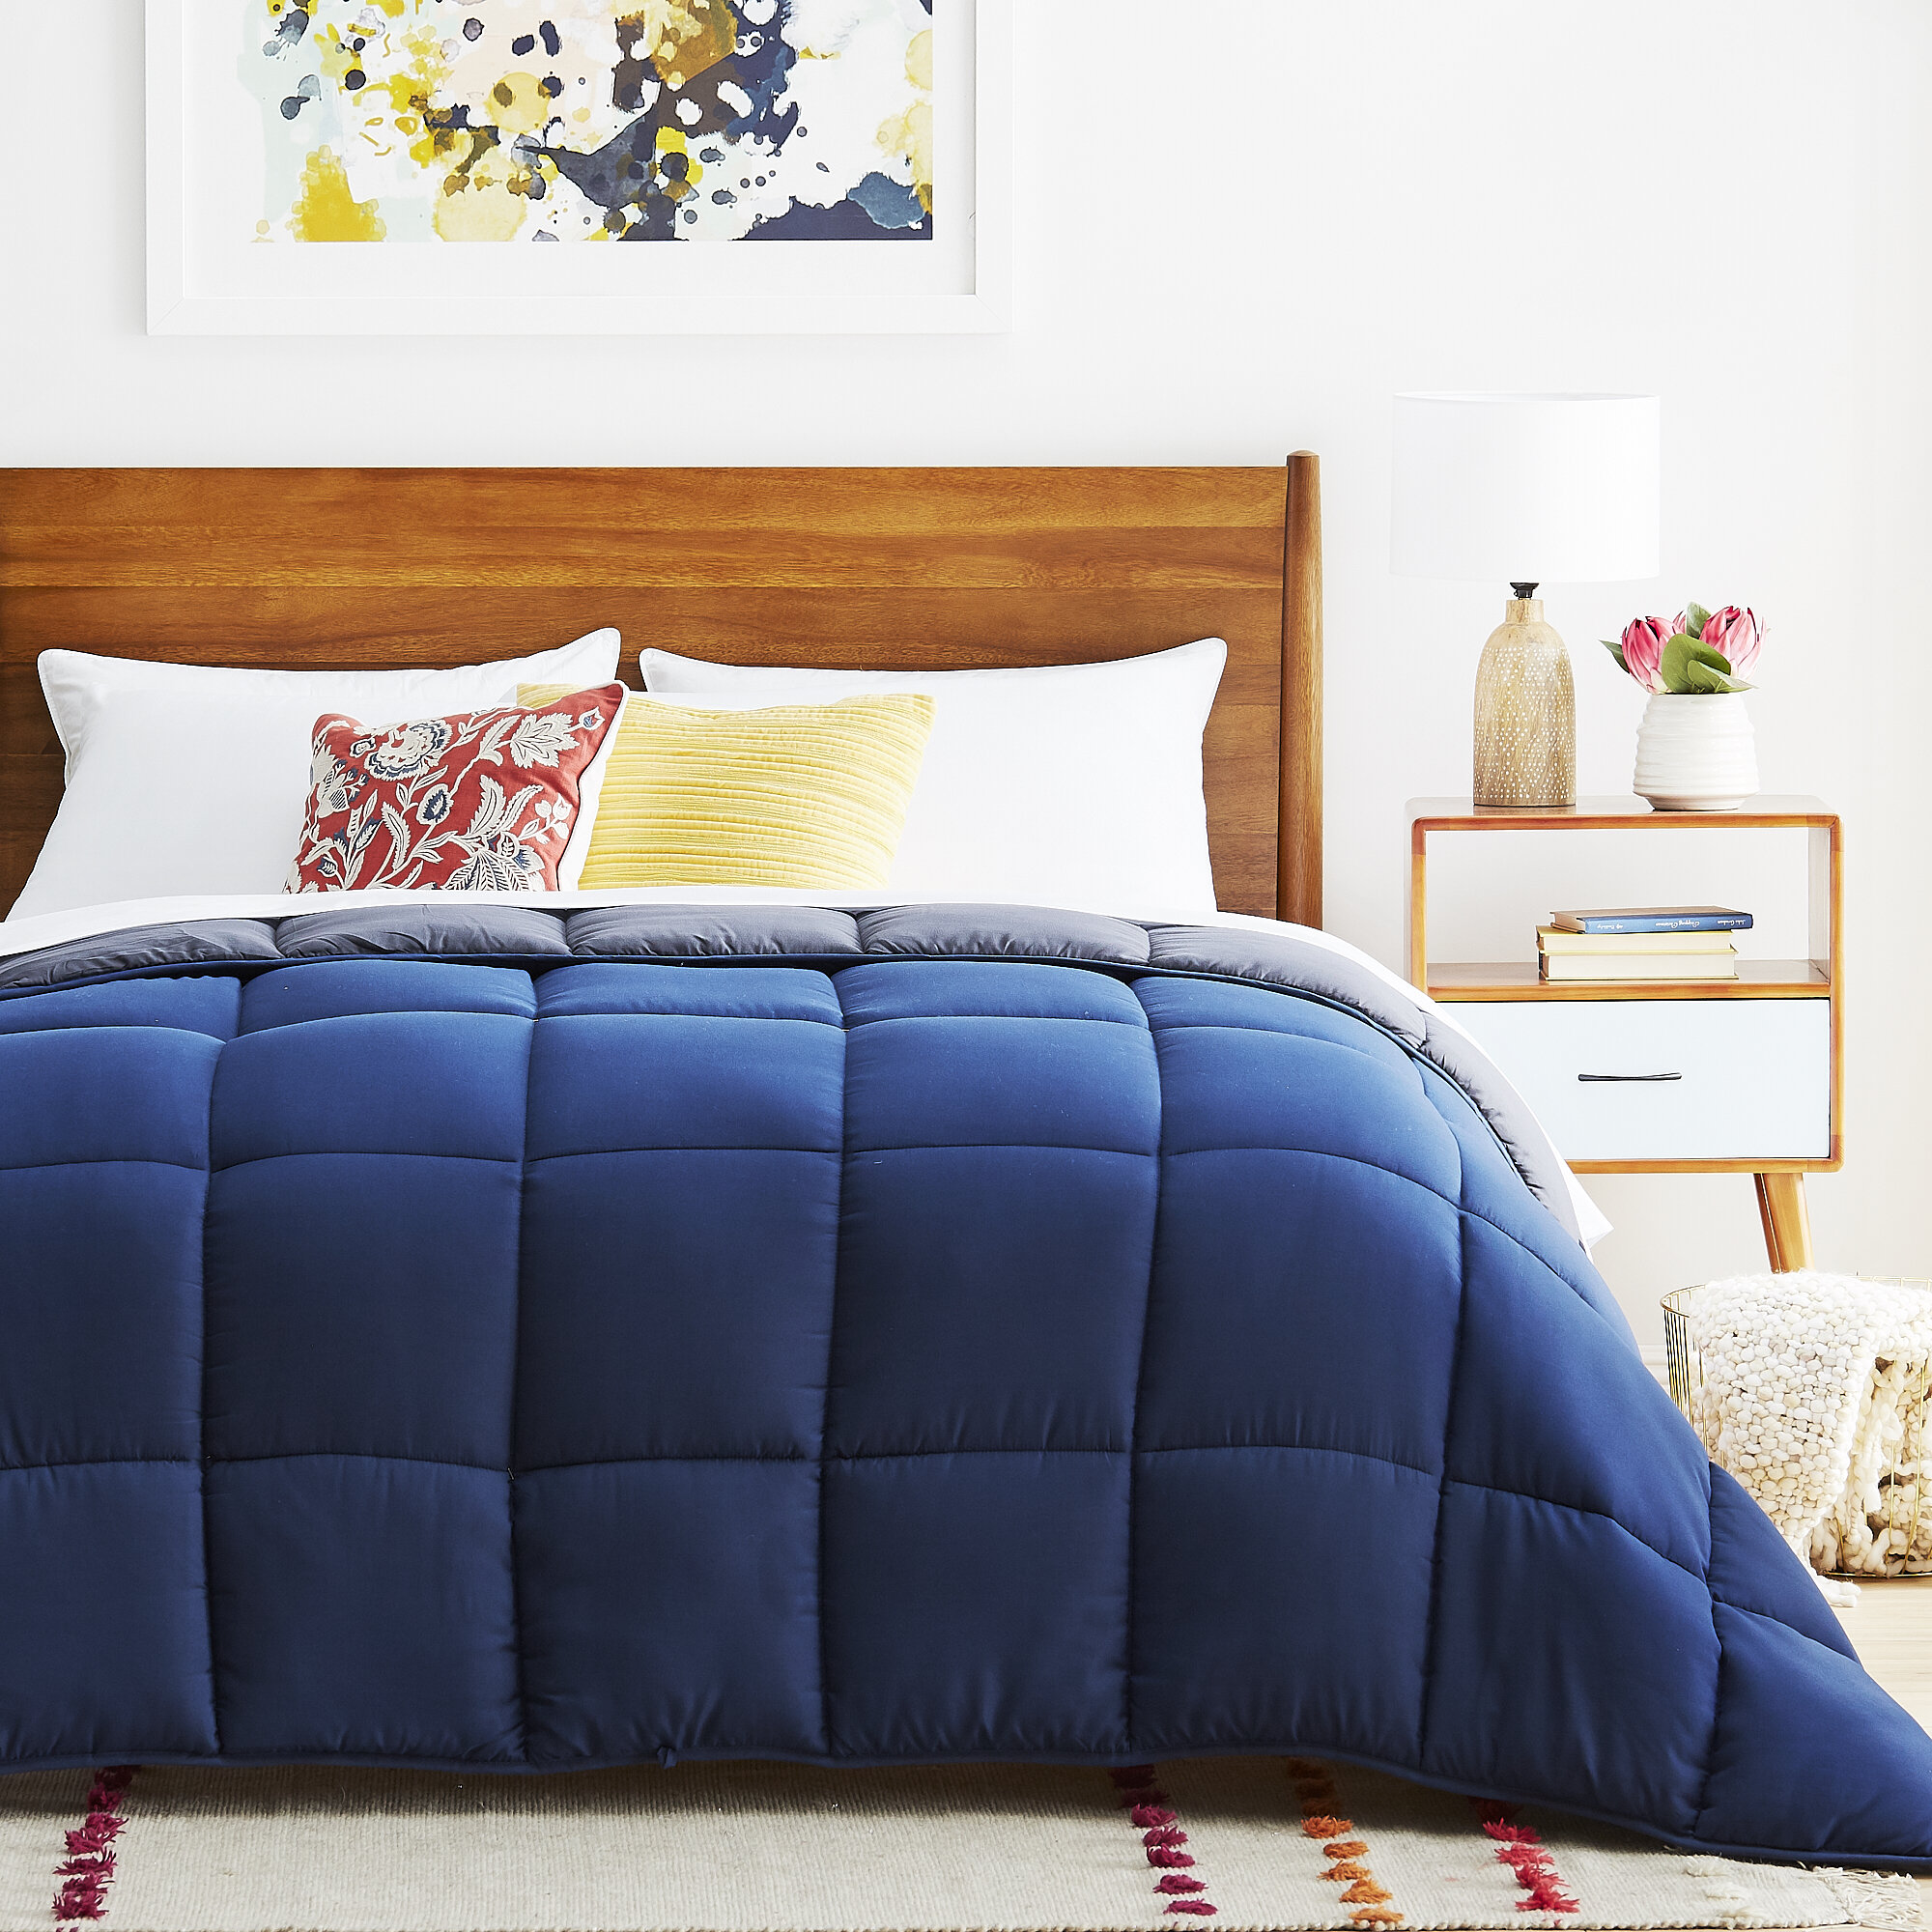 Blue Navy Comforters Sets You Ll Love In 2021 Wayfair